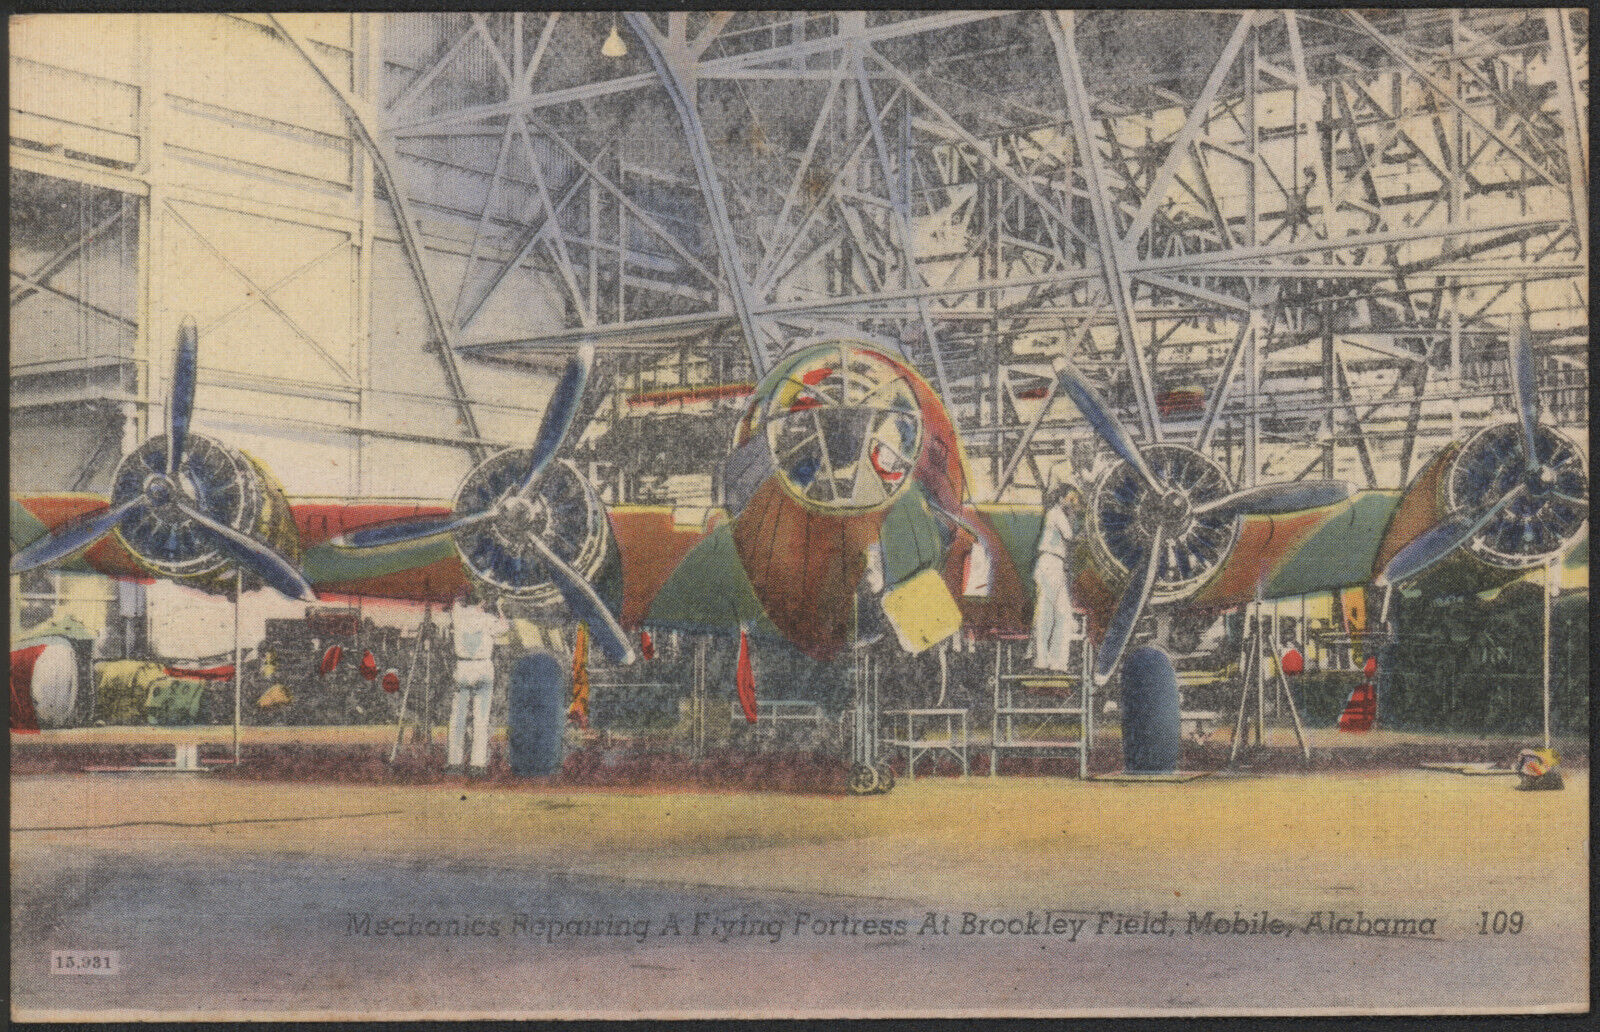 Mechanics Repairing a Flying Fortress at Brookley Field Mobile, AL. Air Force